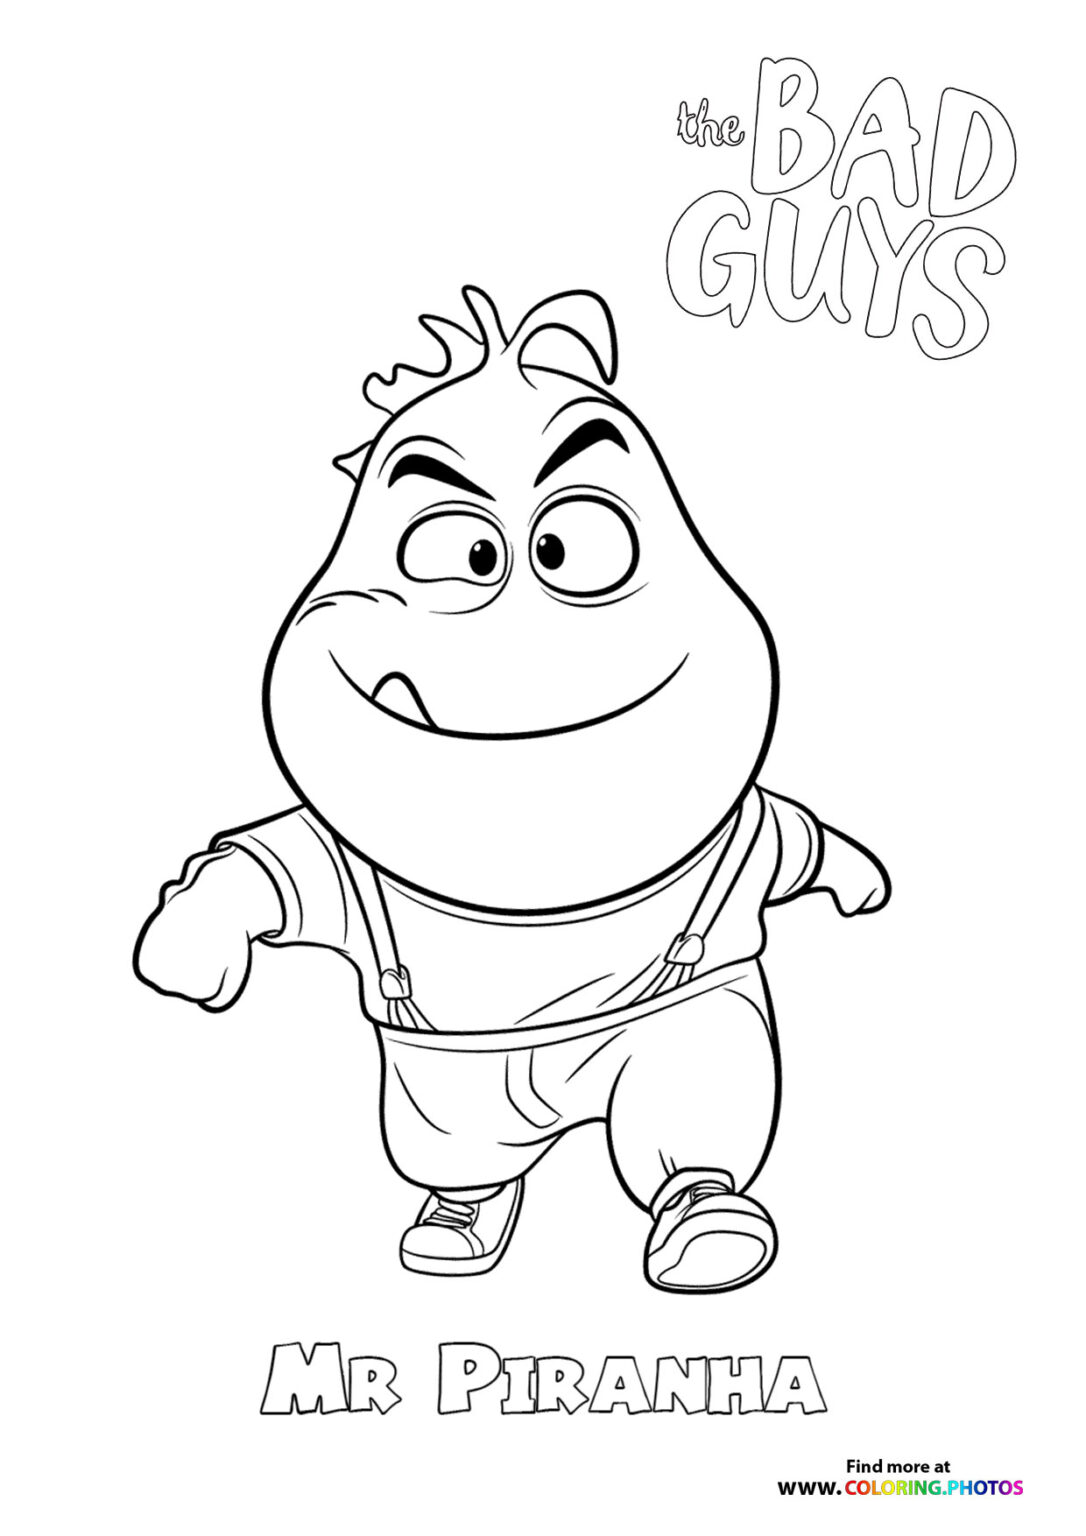 Dreamworks Bad Guys Coloring Pages Coloring Pages